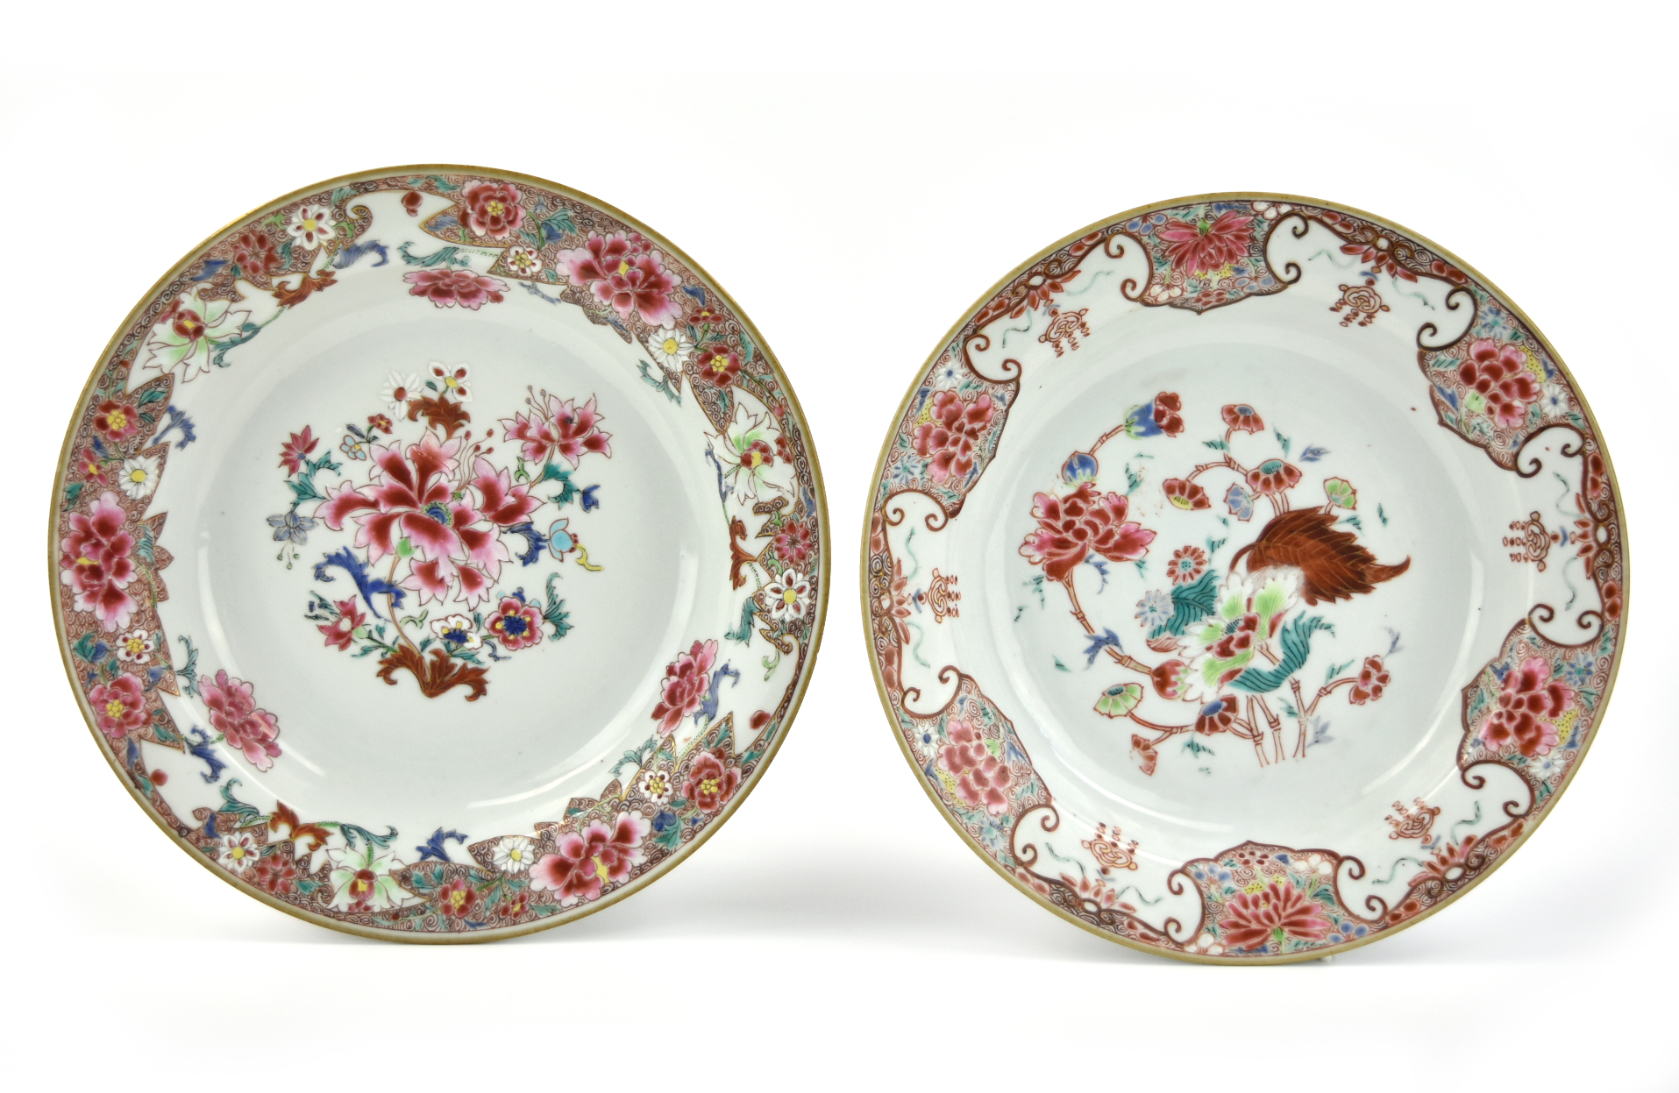 PAIR OF CHINESE EXPORT PLATE YONGZHENG 339816